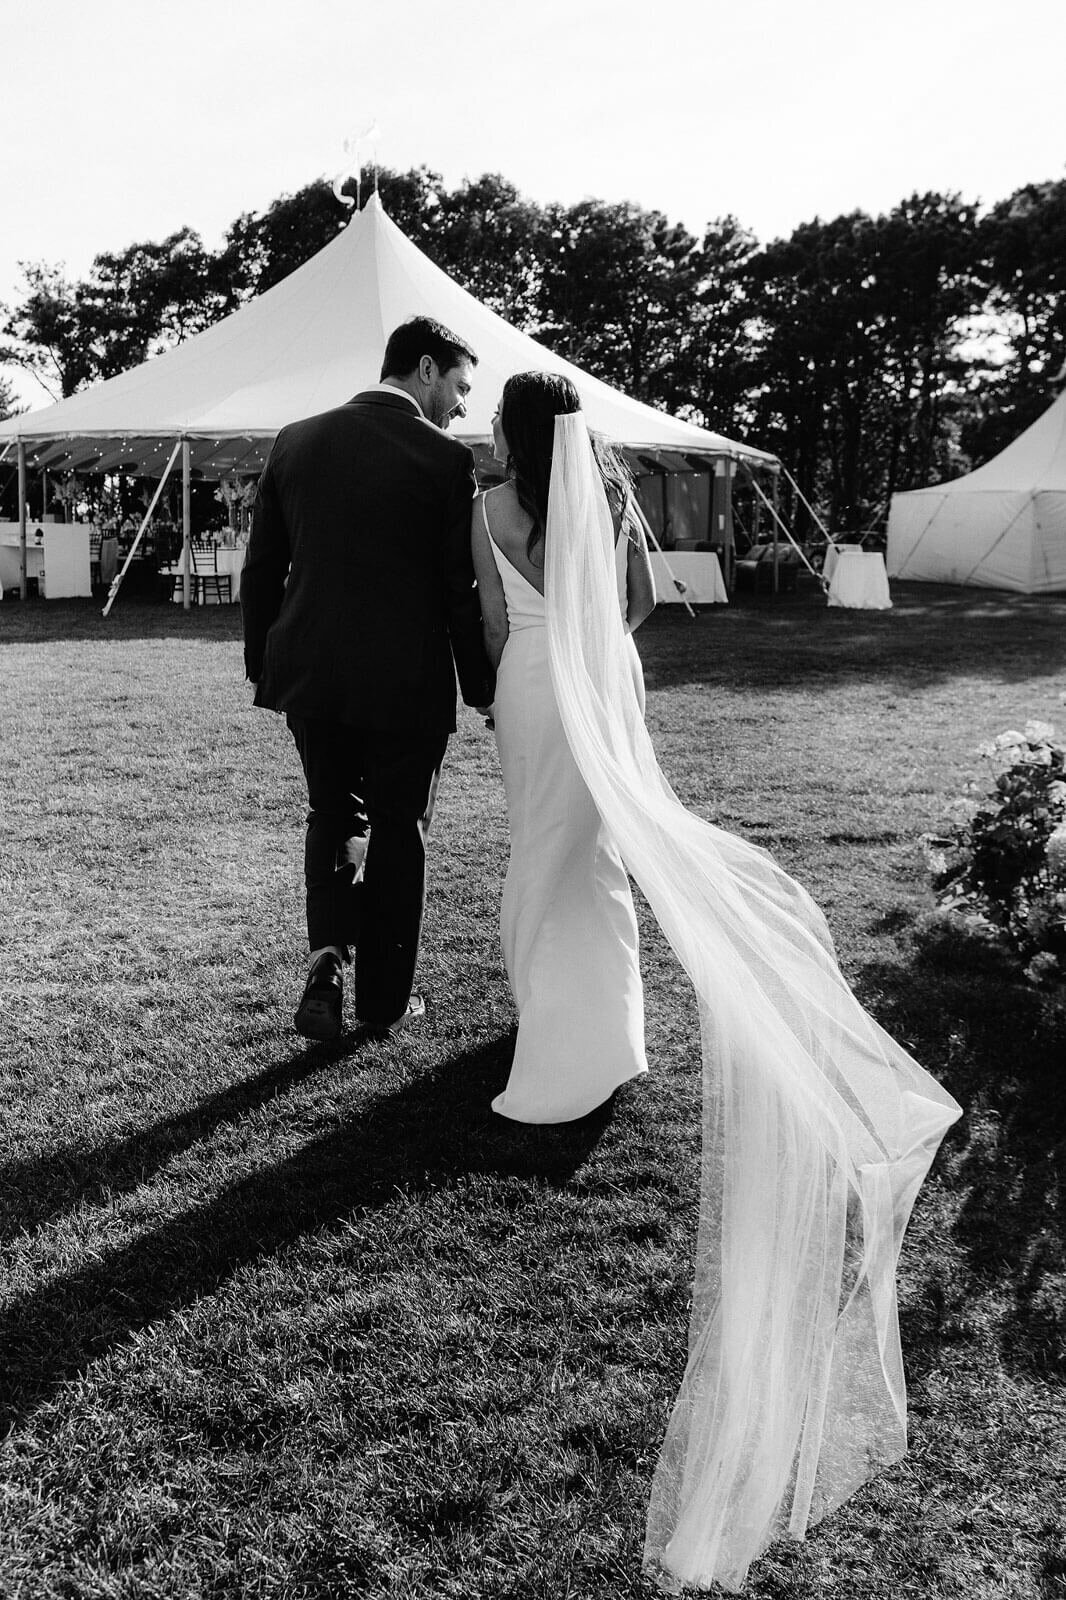 Black and white photo of the bride and the groom walking towards the Cape Cod Summer Tent in MA, after the wedding ceremony.